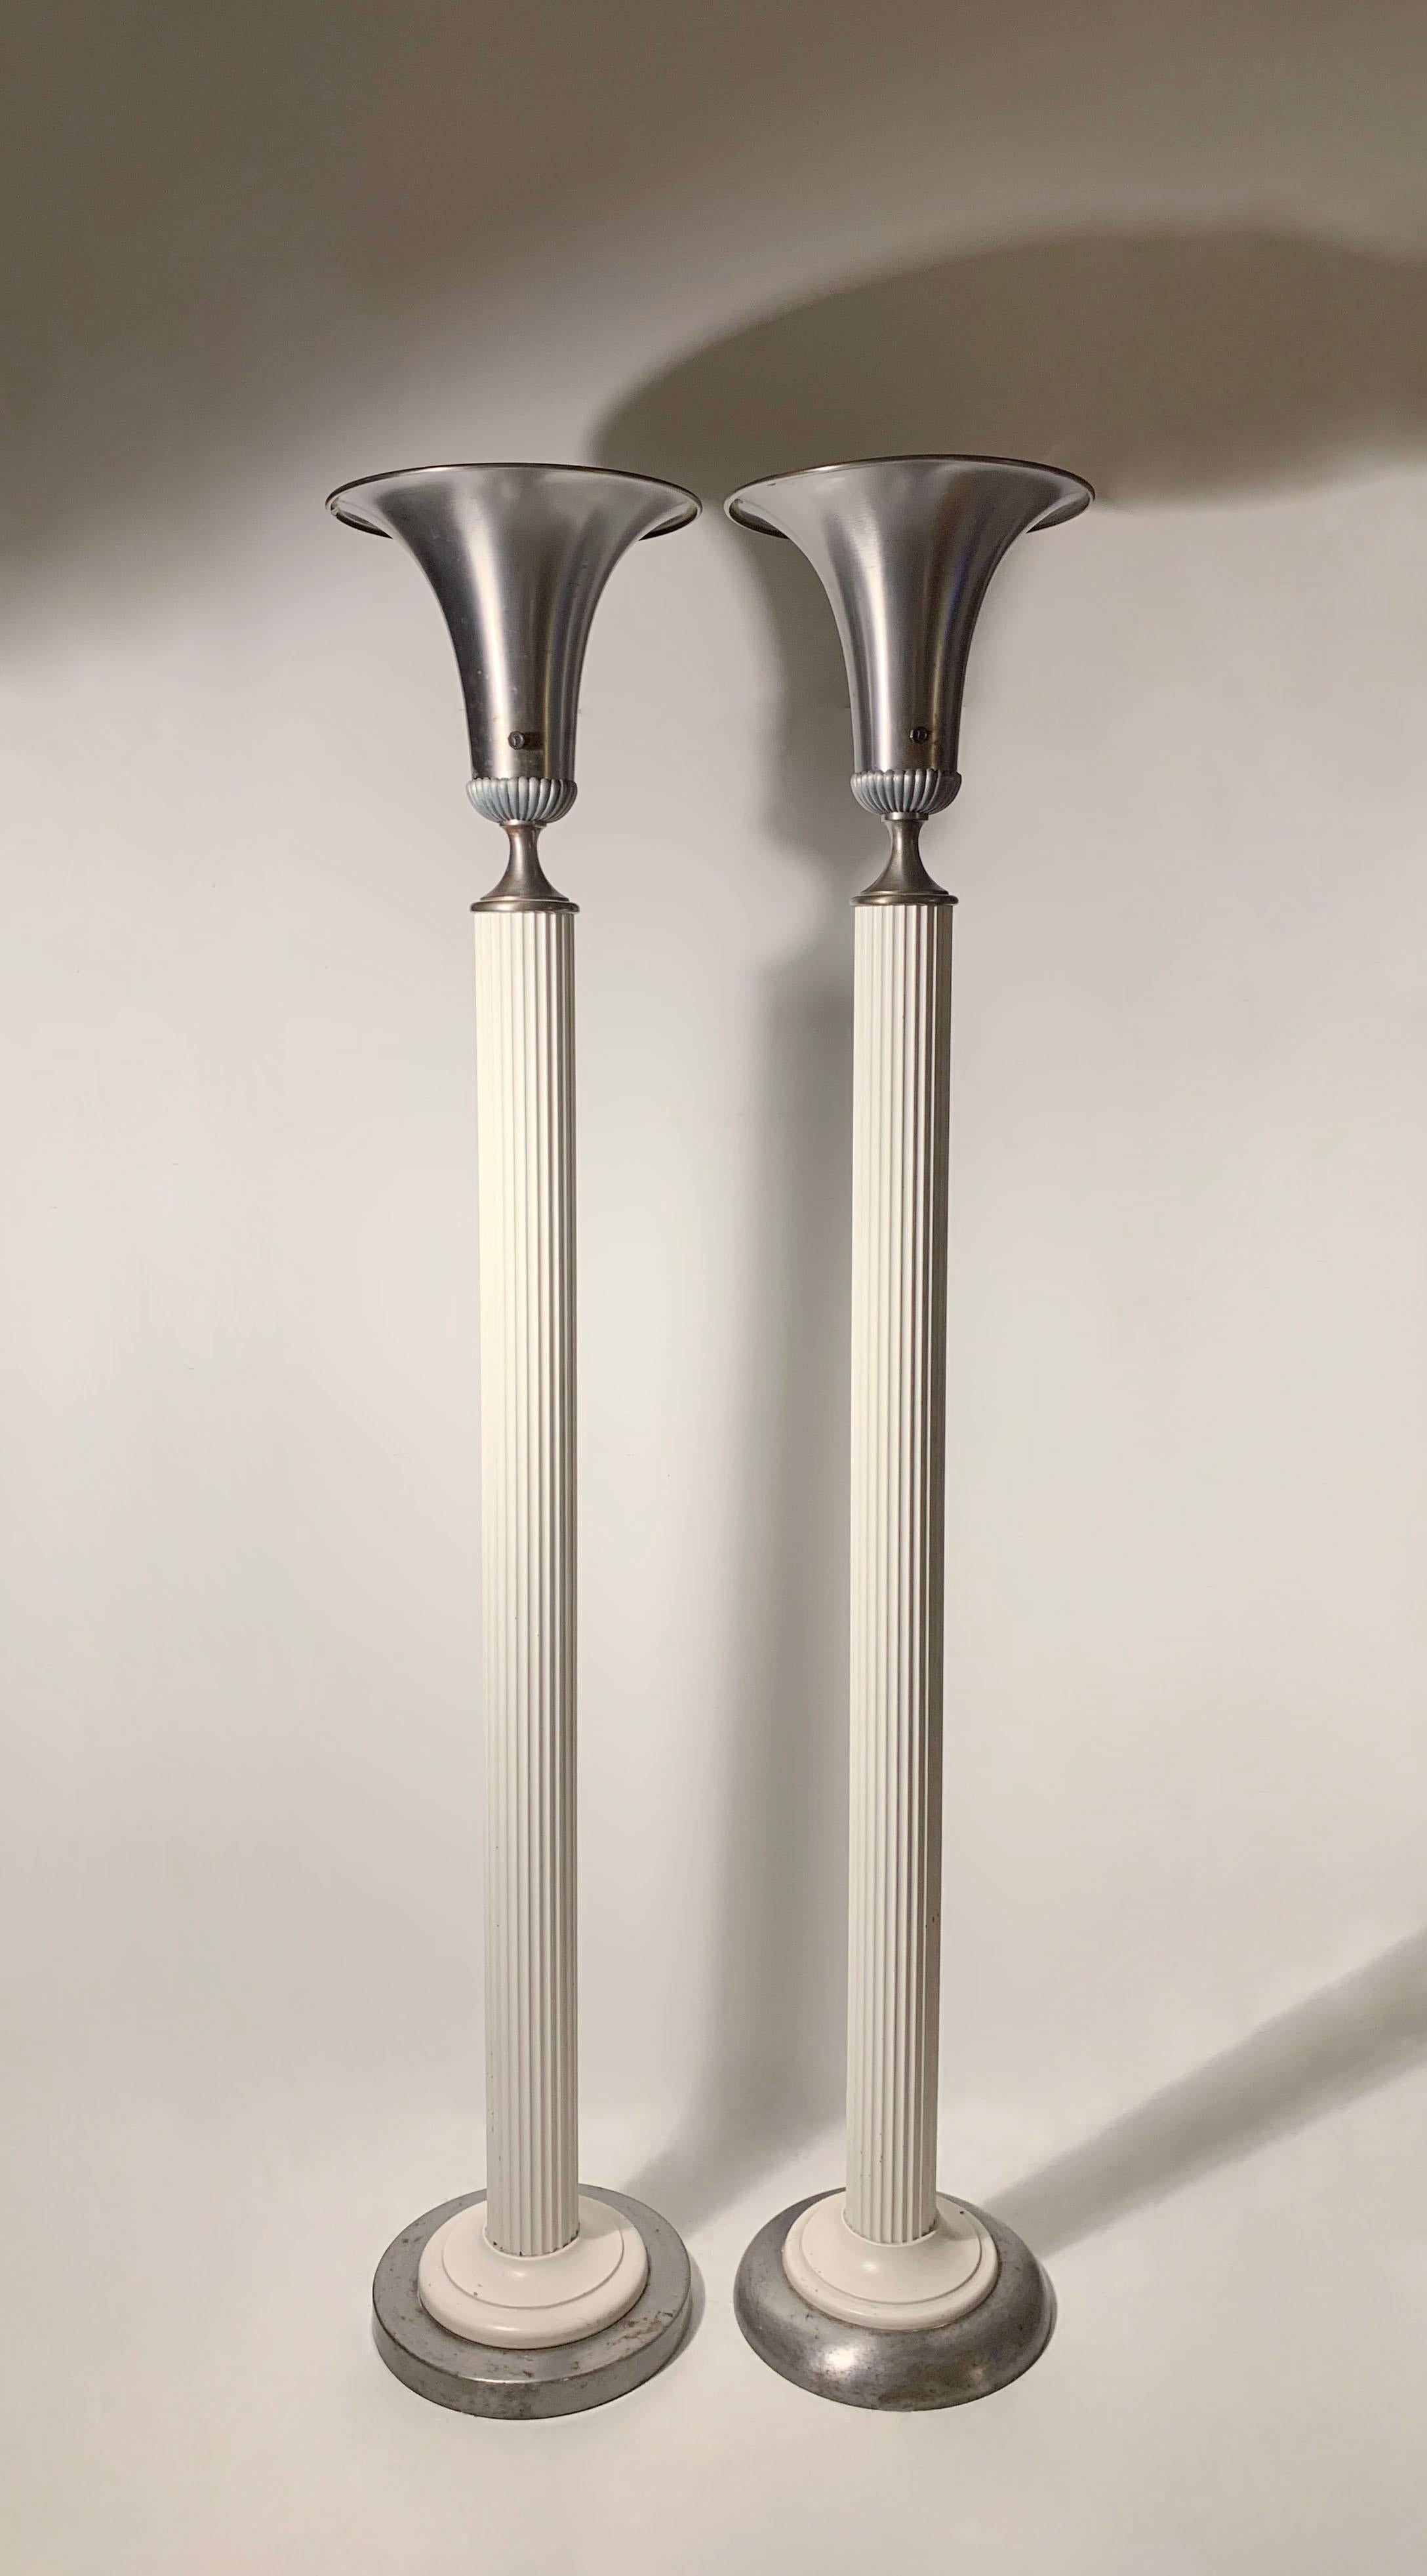 Near pair of vintage Hollywood Regency  deco metal torcheres in the manner of Grosfeld House, Walter Von Nessen. Uncertain to designer/maker.

Base plates are slightly different. One stands a little more than 1/4